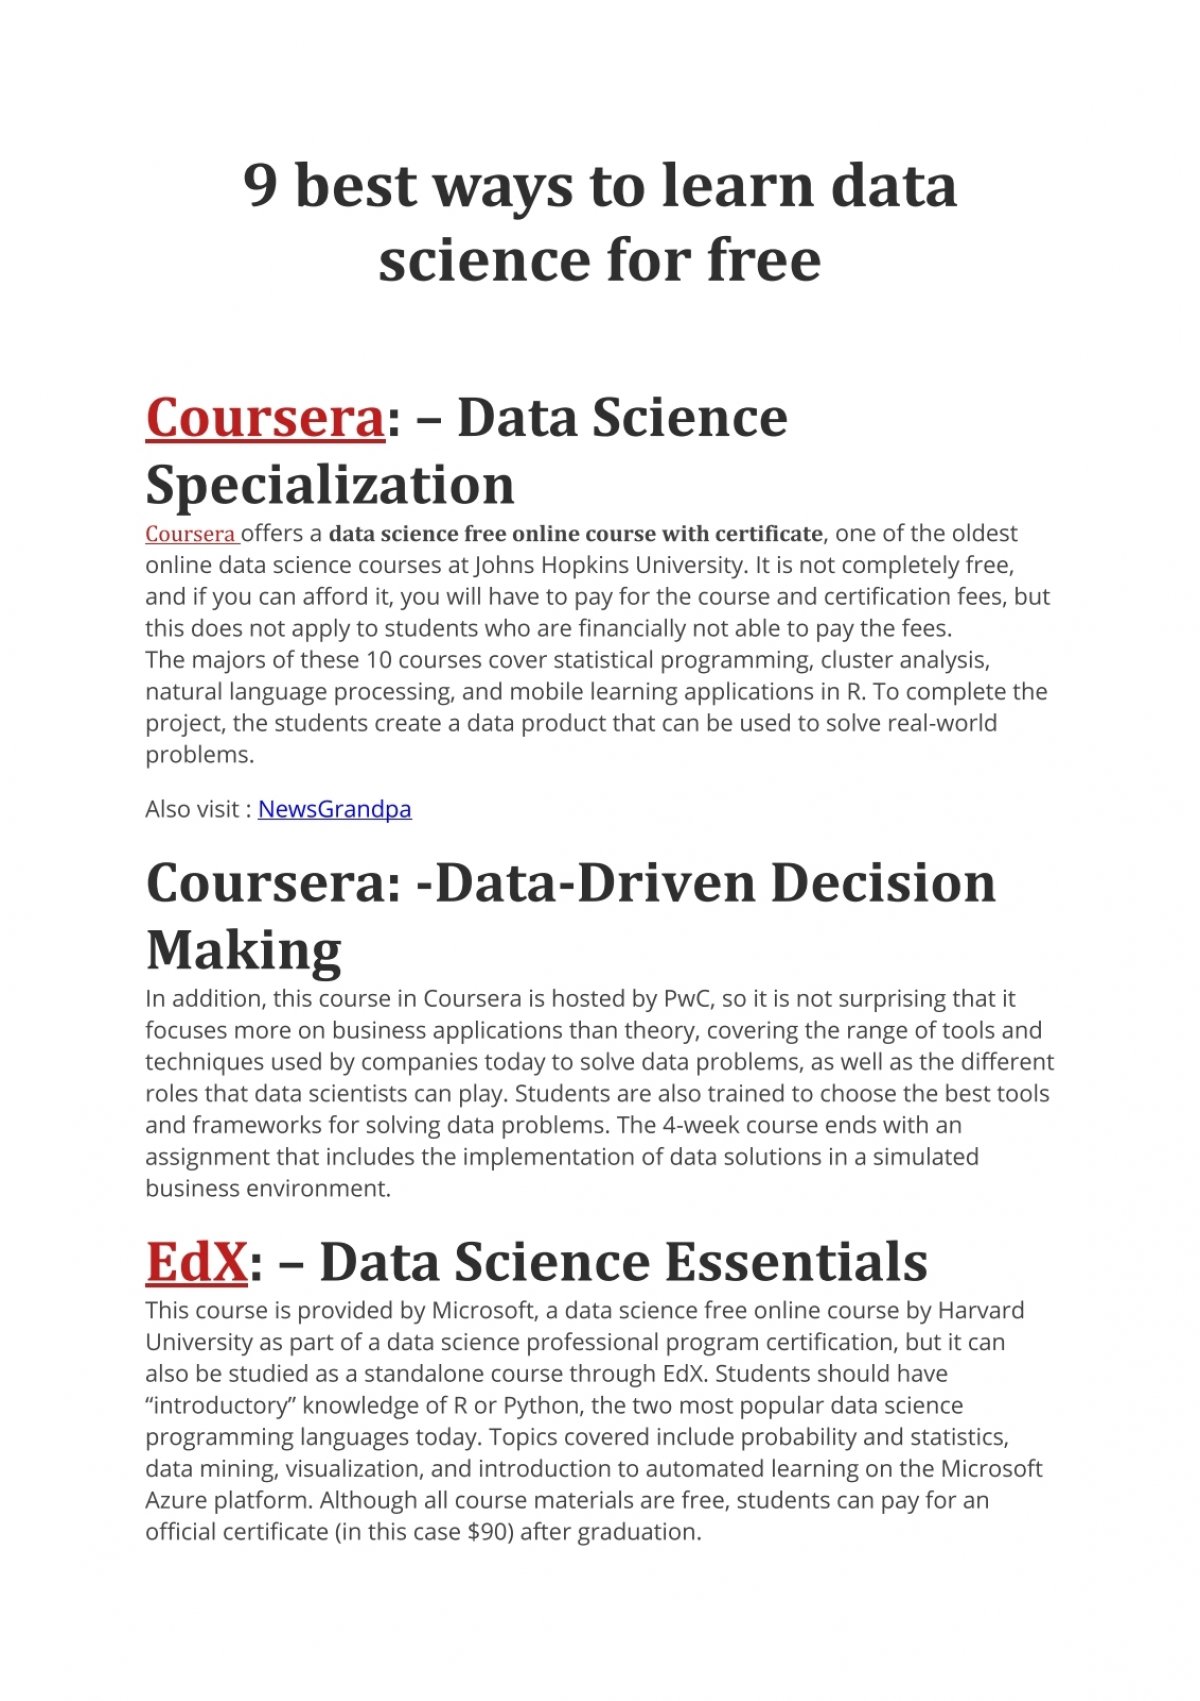 9 best ways to learn data science for free